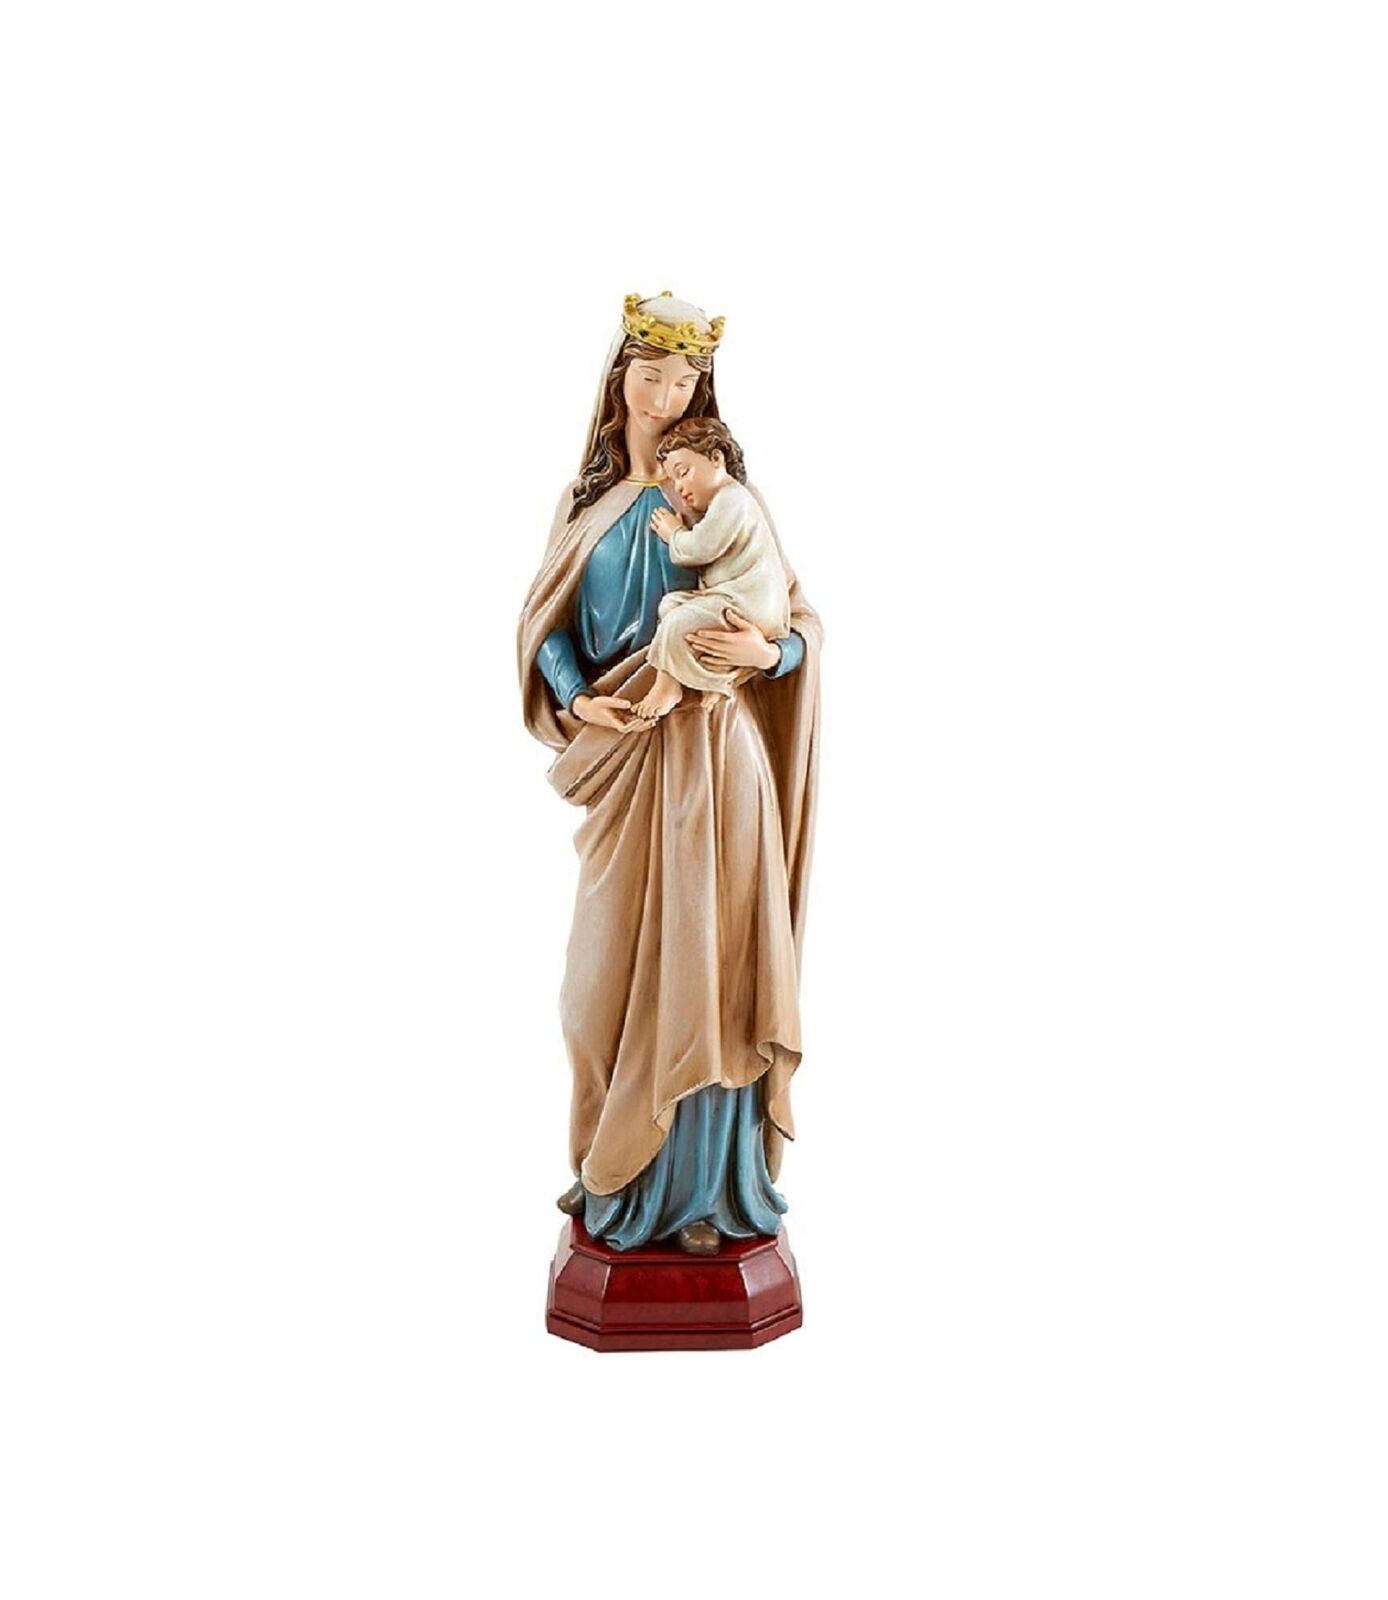 Creative Brands G4078 Mary Queen of Heaven Statue, 24-inch Height, Resin